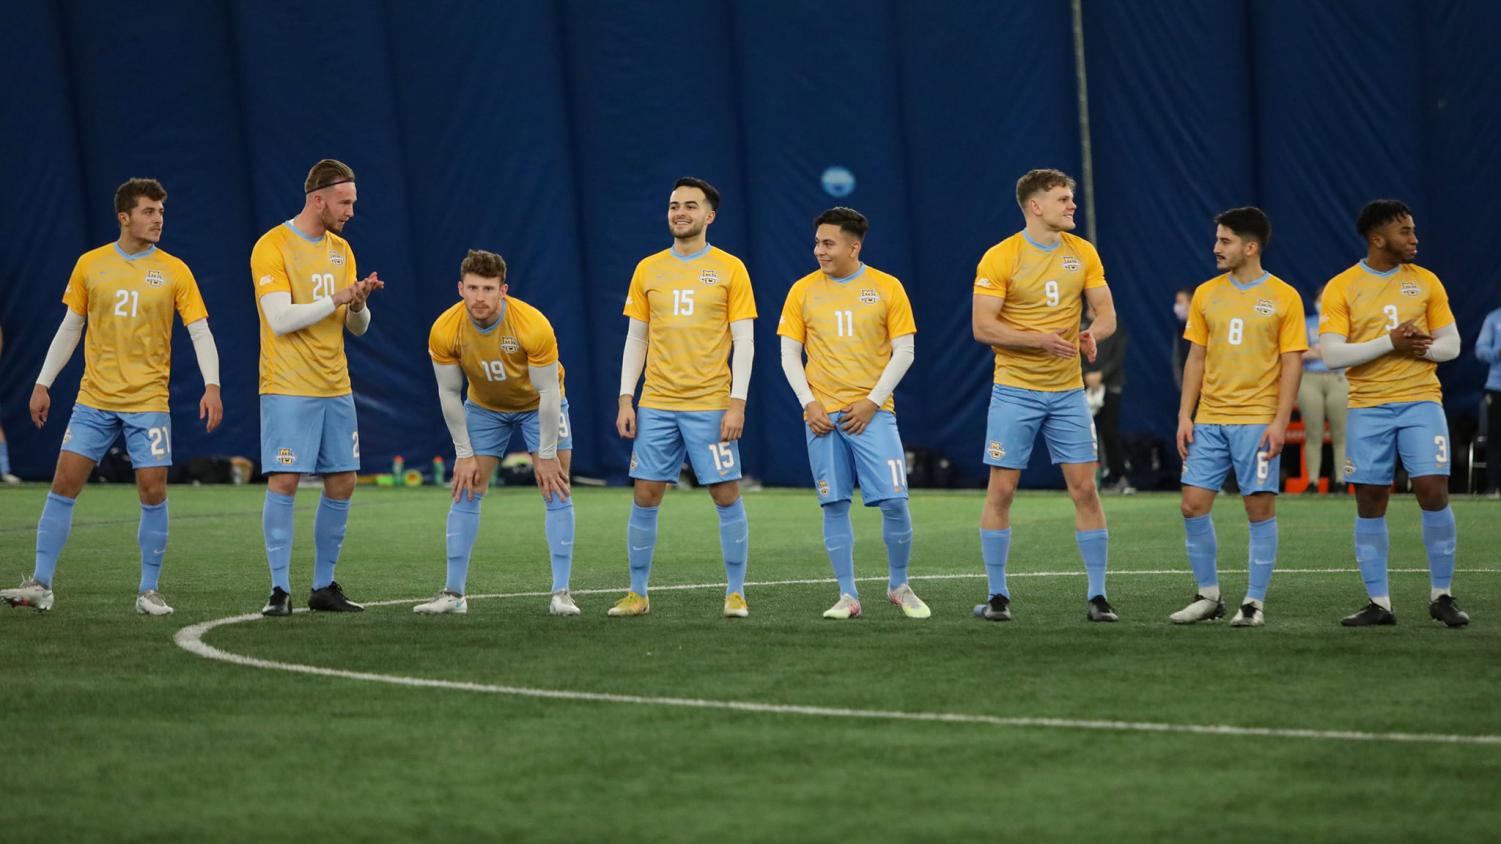 Men's soccer uses GPS, InStat to advantage – Marquette Wire